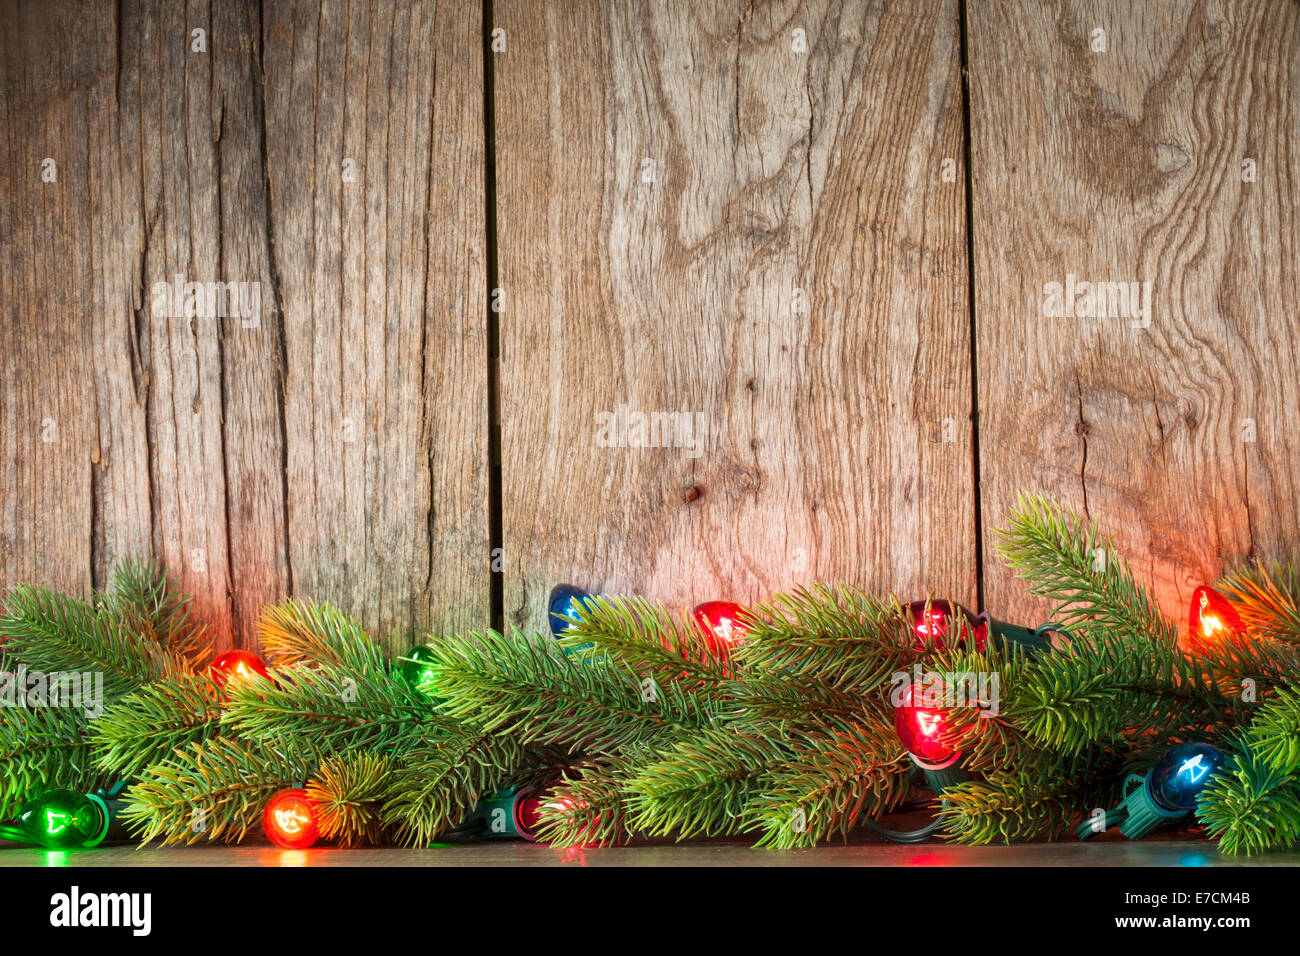 Christmas tree branch with lights on grunge wood background Stock Photo